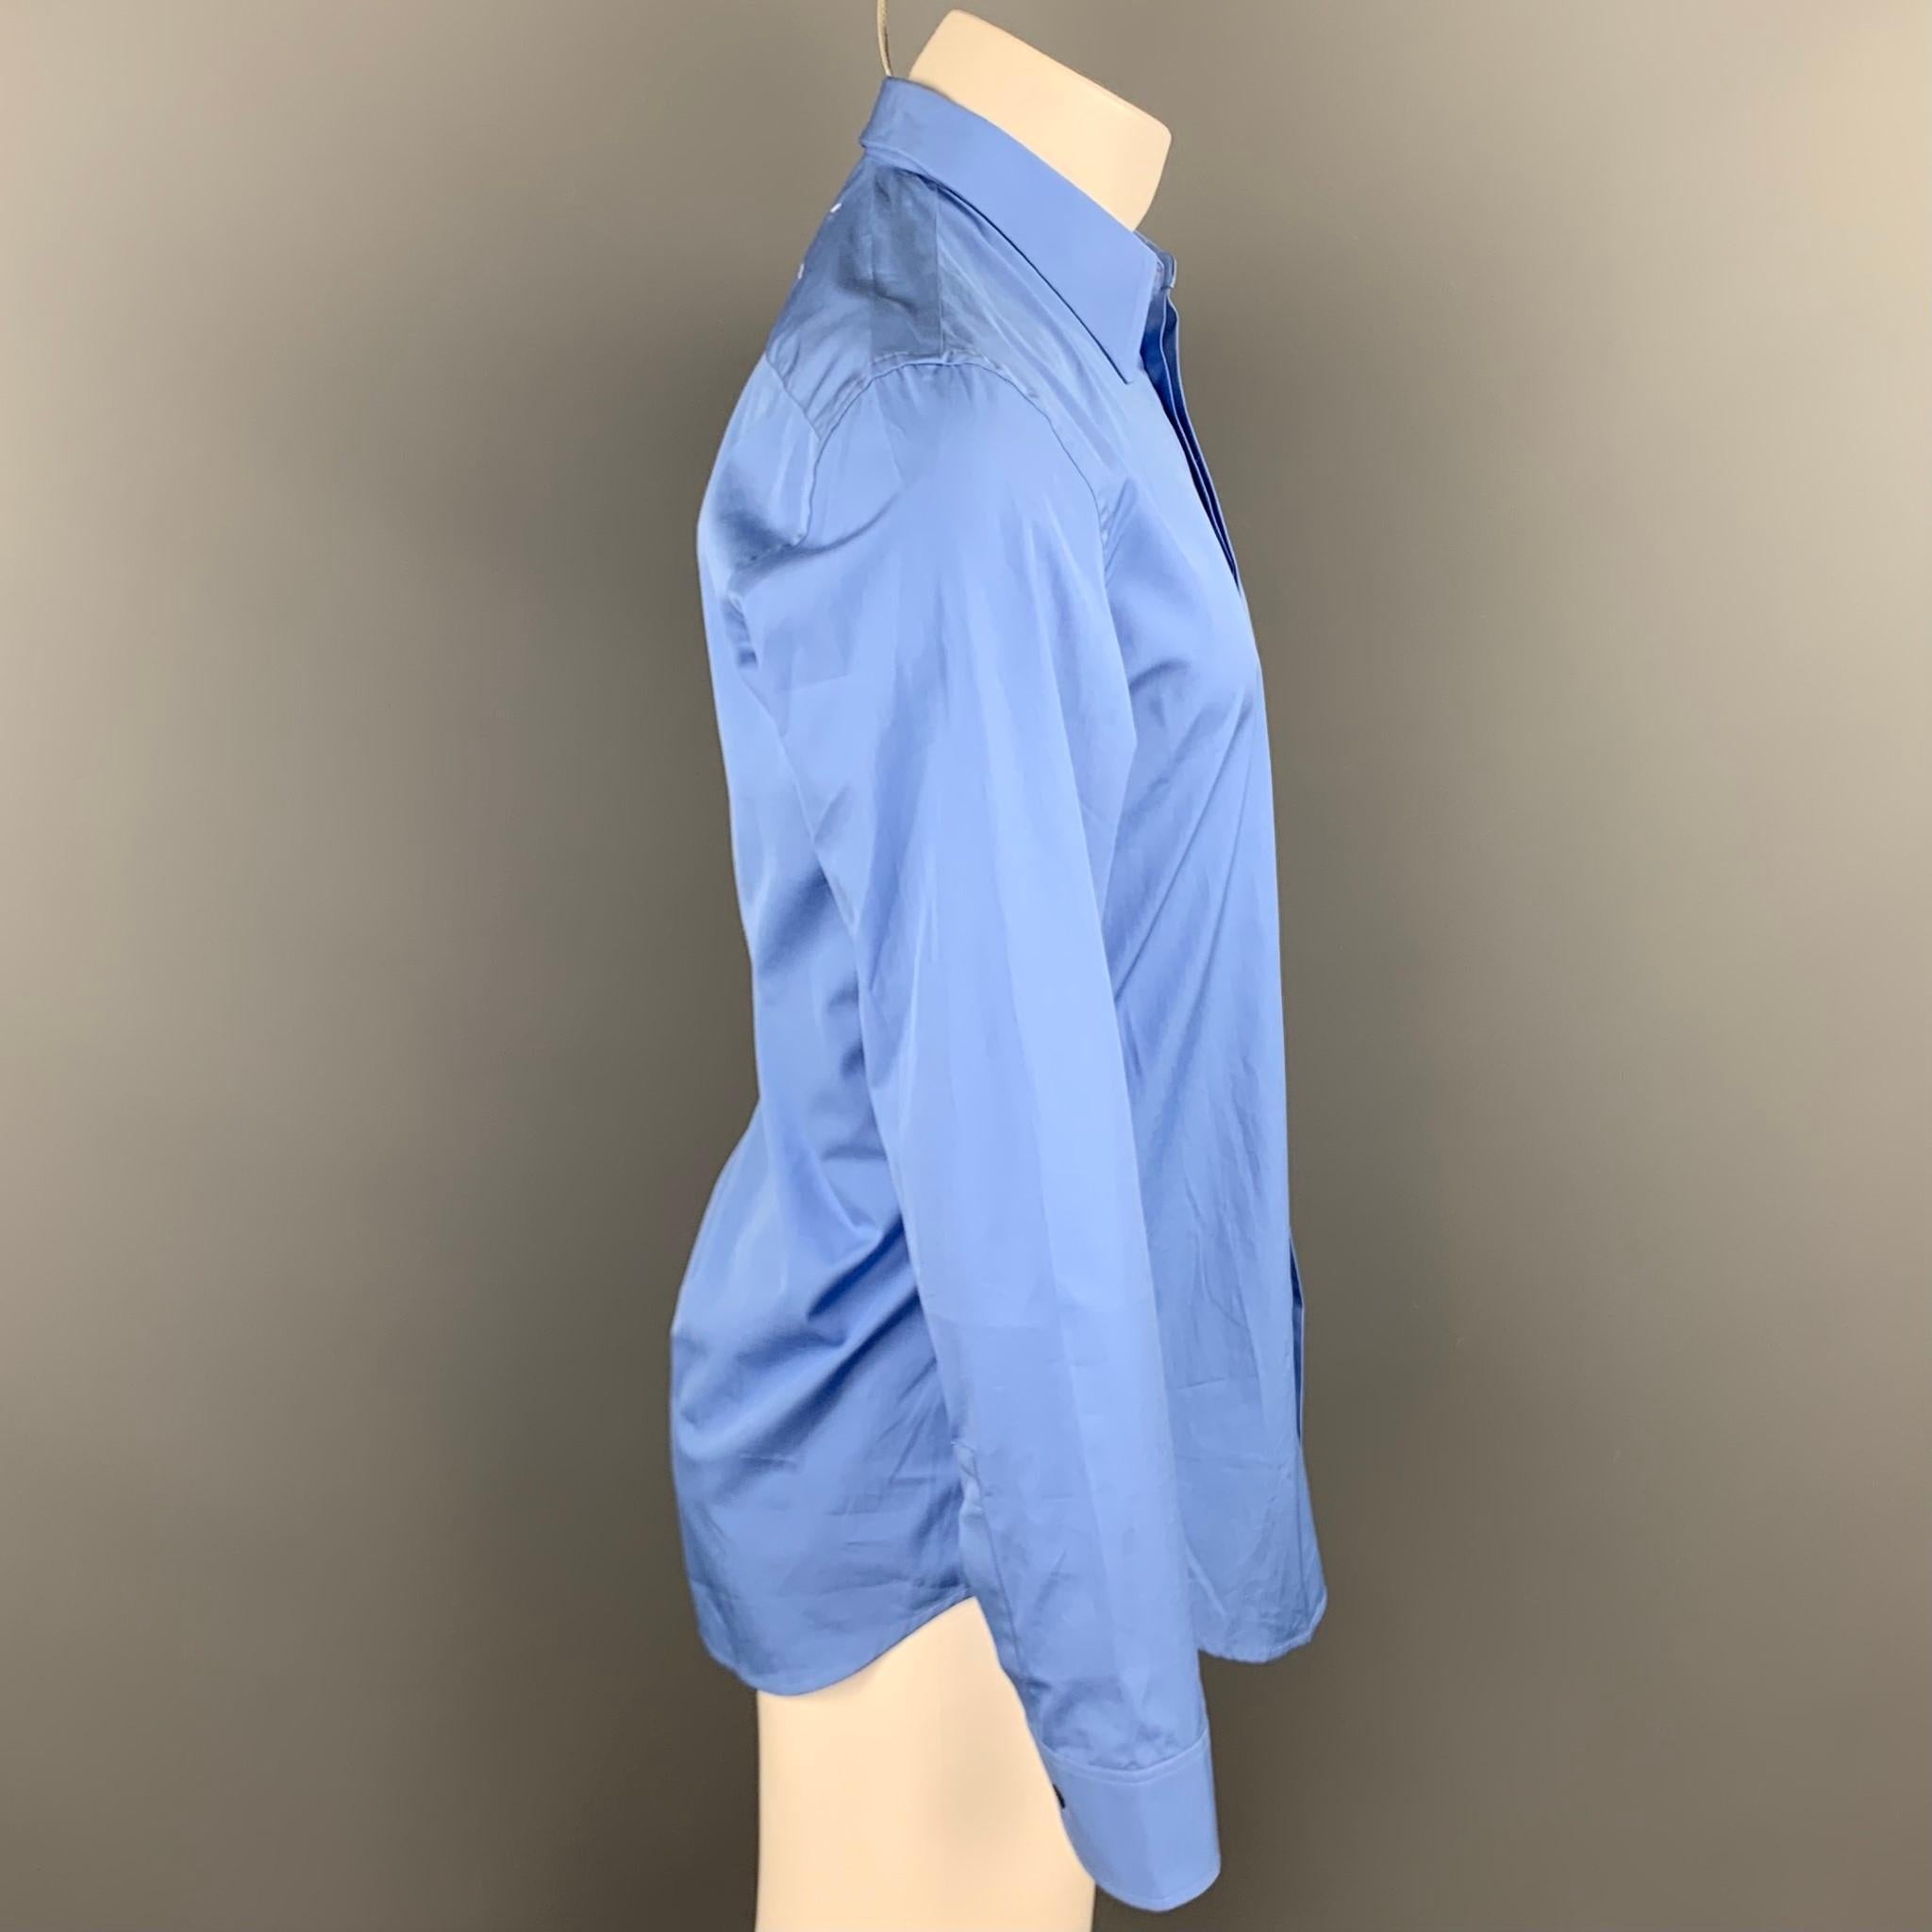 MAISON MARGIELA long sleeve shirt comes in a blue cotton featuring a spread collar and a hidden button closure. Made in Romania.

Very Good Pre-Owned Condition.
Marked: 40

Measurements:

Shoulder: 18 in.
Chest: 41 in.
Sleeve: 26 in. 
Length: 30.5